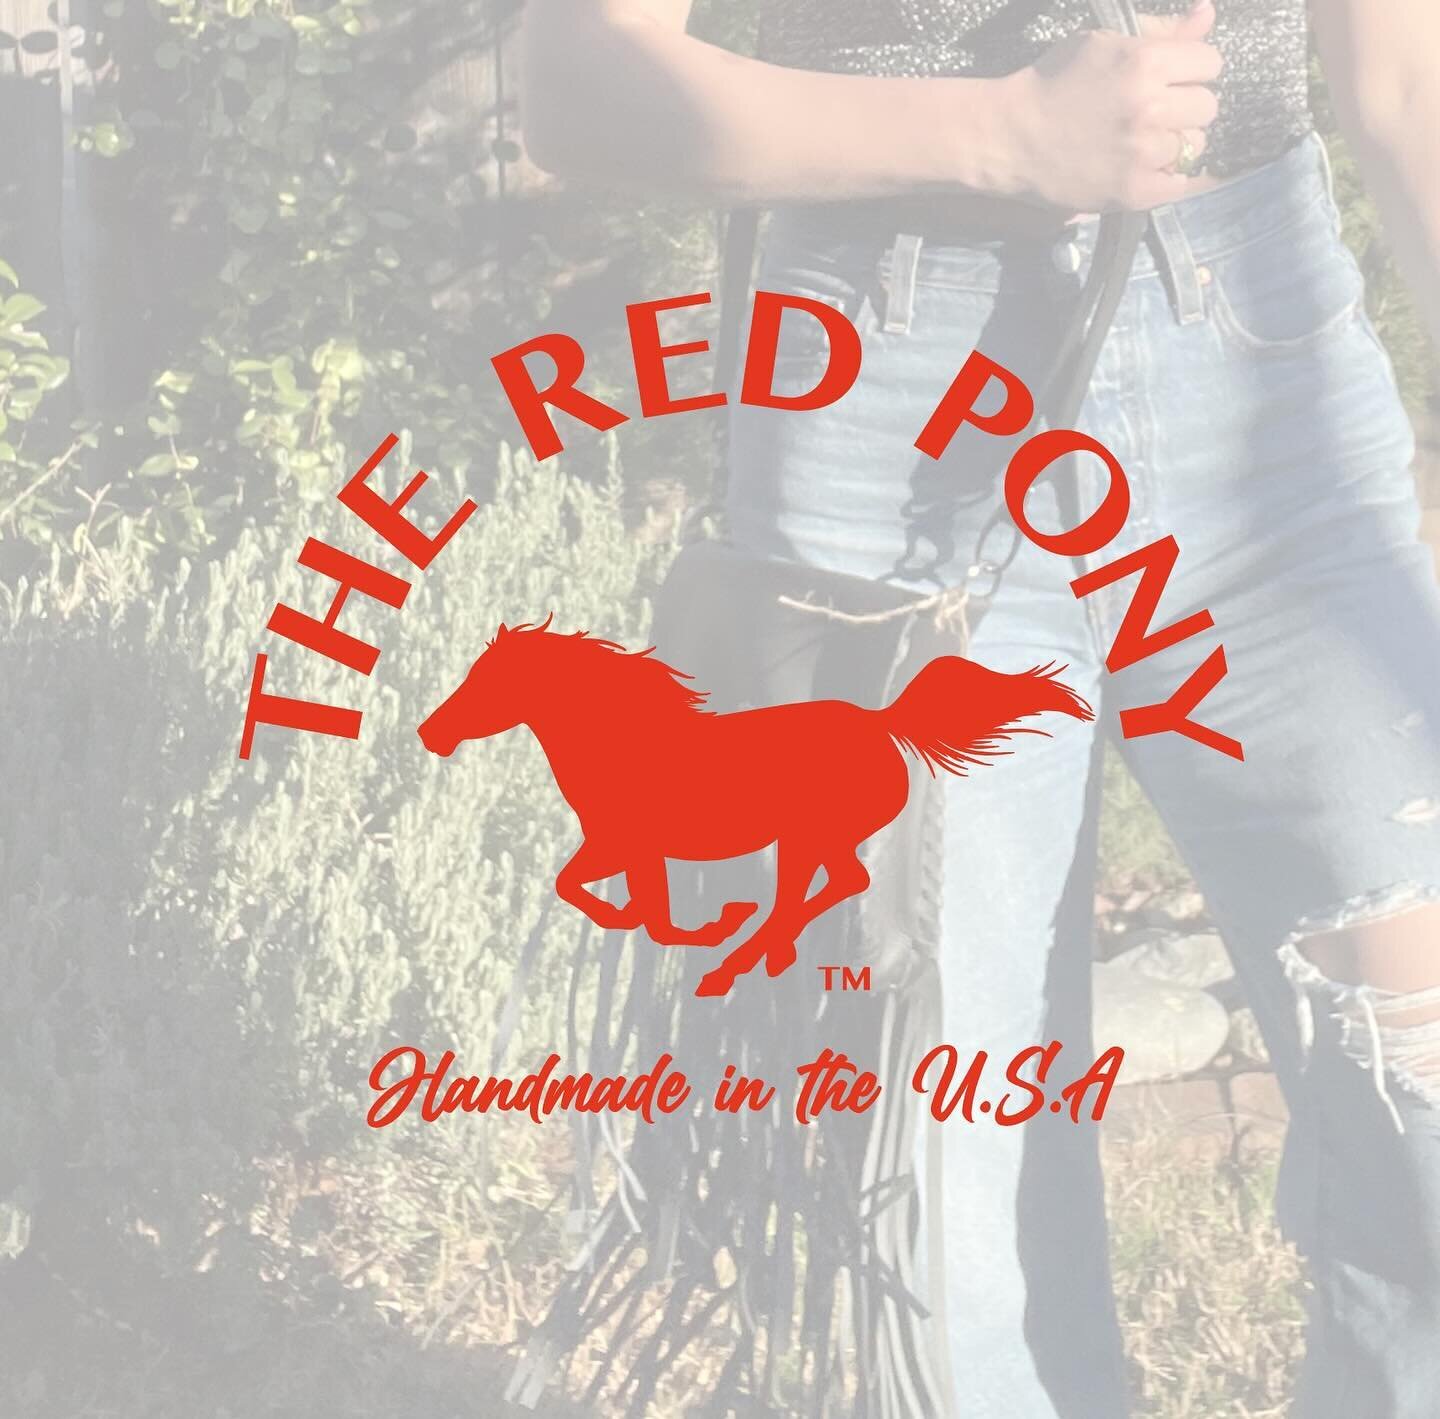 ✨ Brand design &amp; patterns for The Red Pony handmade leather goods by @liz_gel_nail_artist. The patterns are designed for the satin lining of her amazing handbags. 

#shoplocal #chicobusiness #womeninbusiness #localbusiness #chicoca #durhamca #par